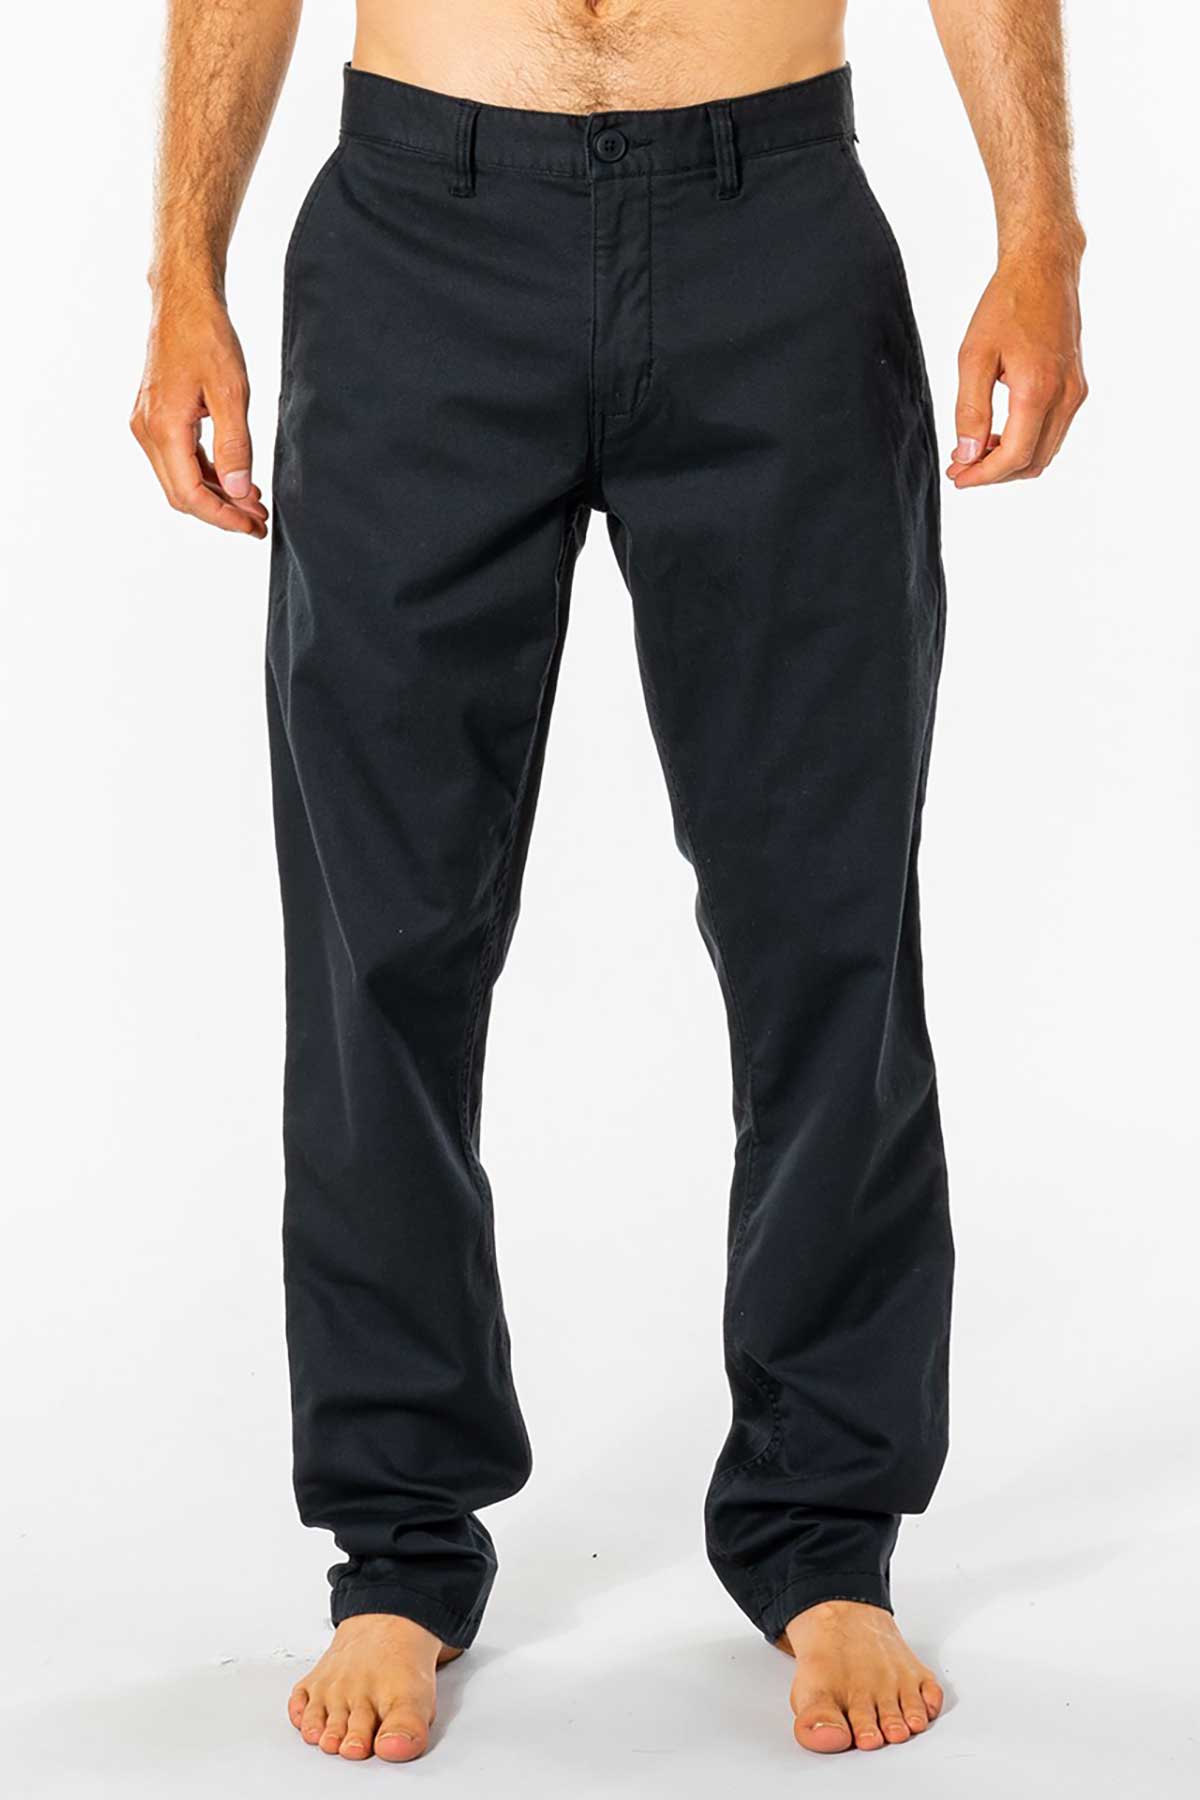 Rip Curl Mens Pant Re Entry Chino black front view close up